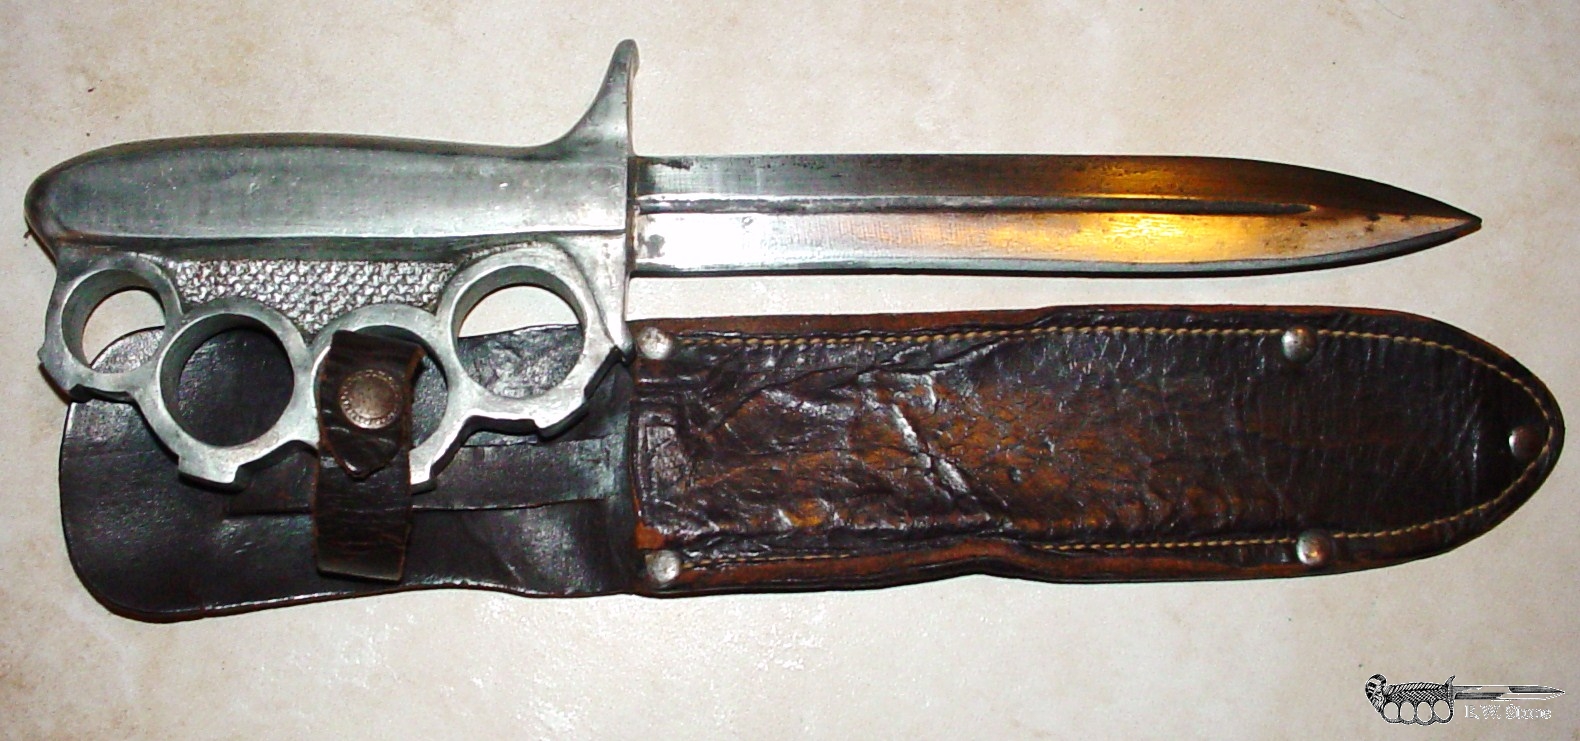 Unmarked Aussie Knuckle Knife similar to American Everitt